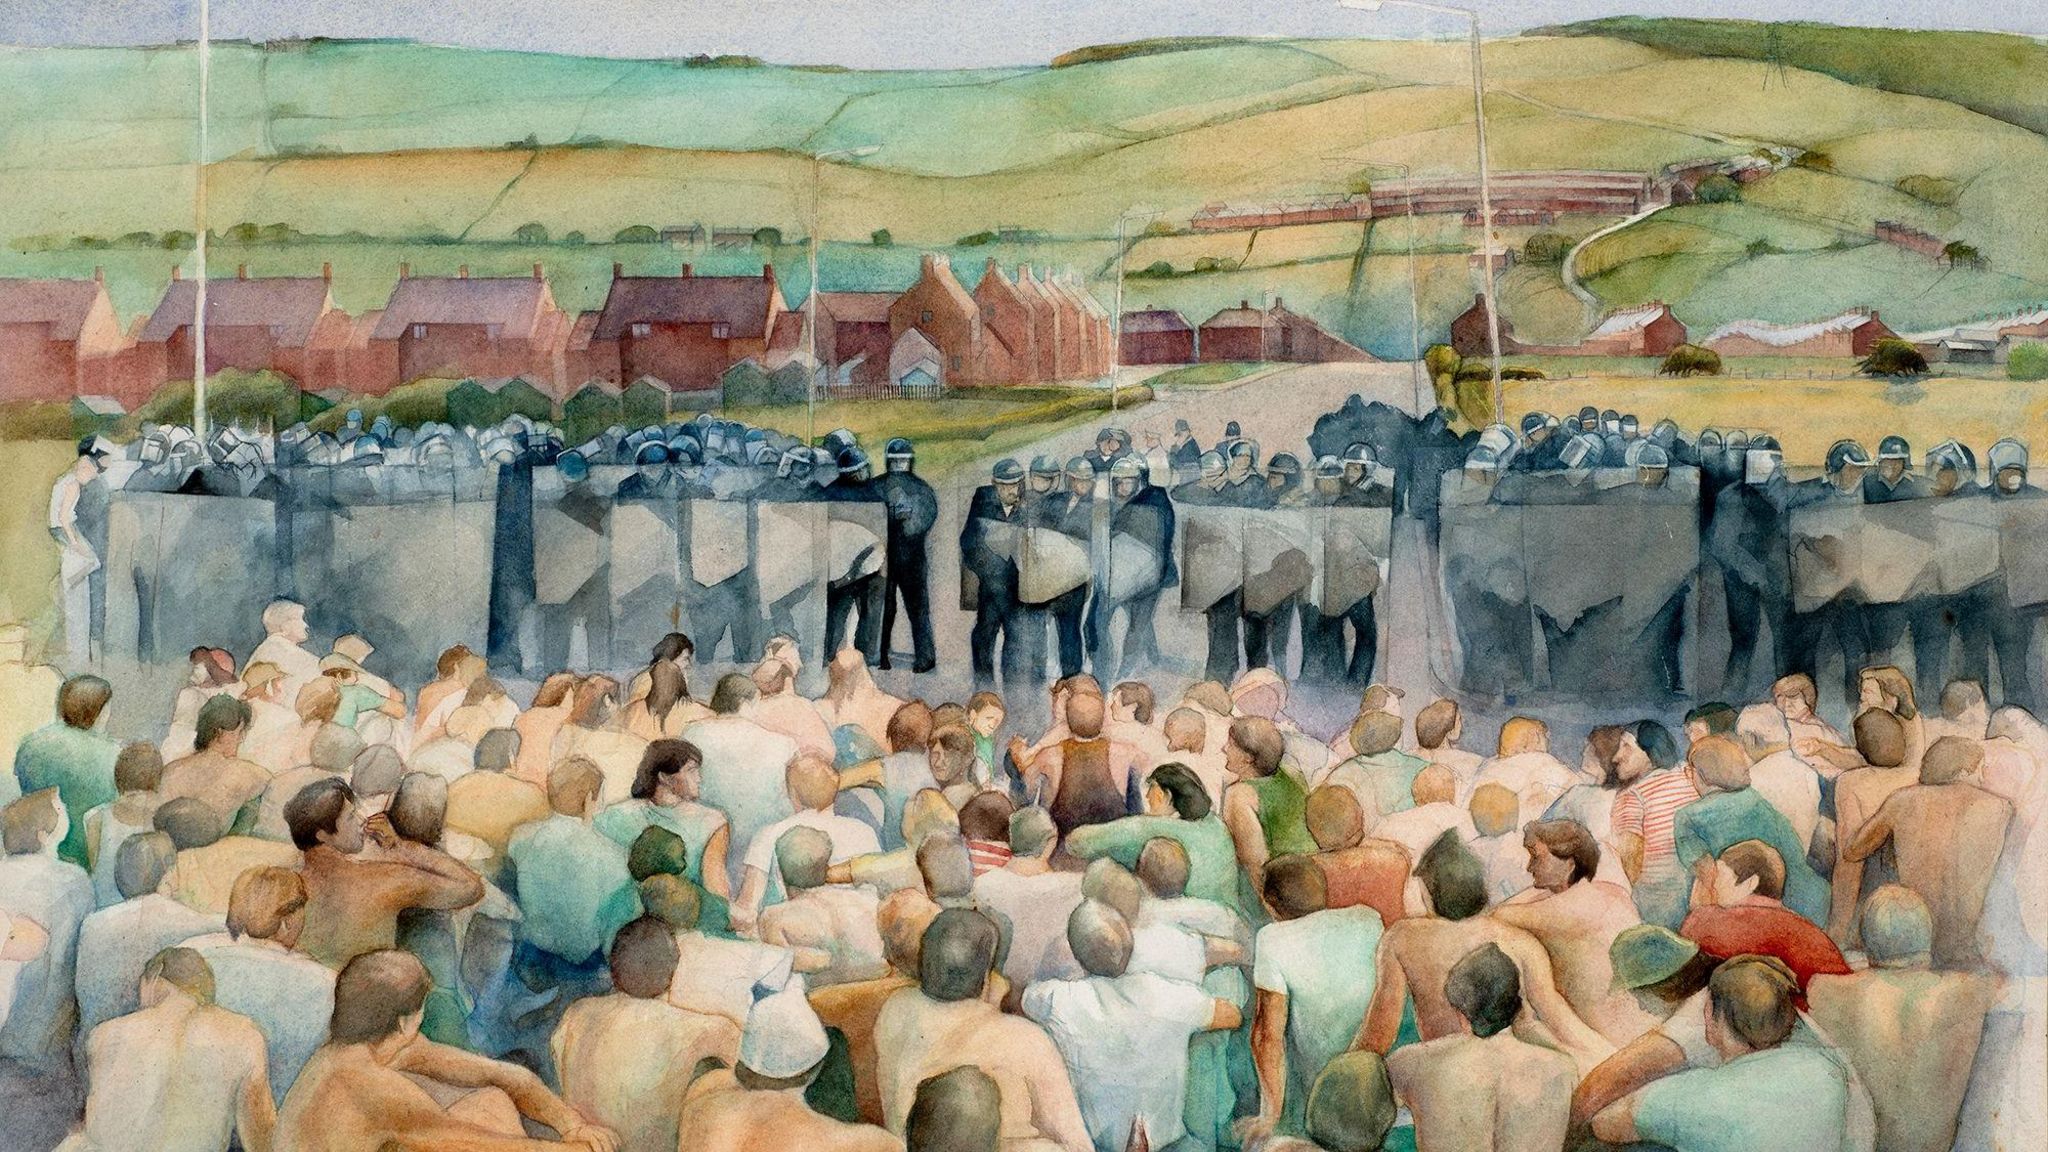 Barrie Ormsby's Miners' Strike 1984